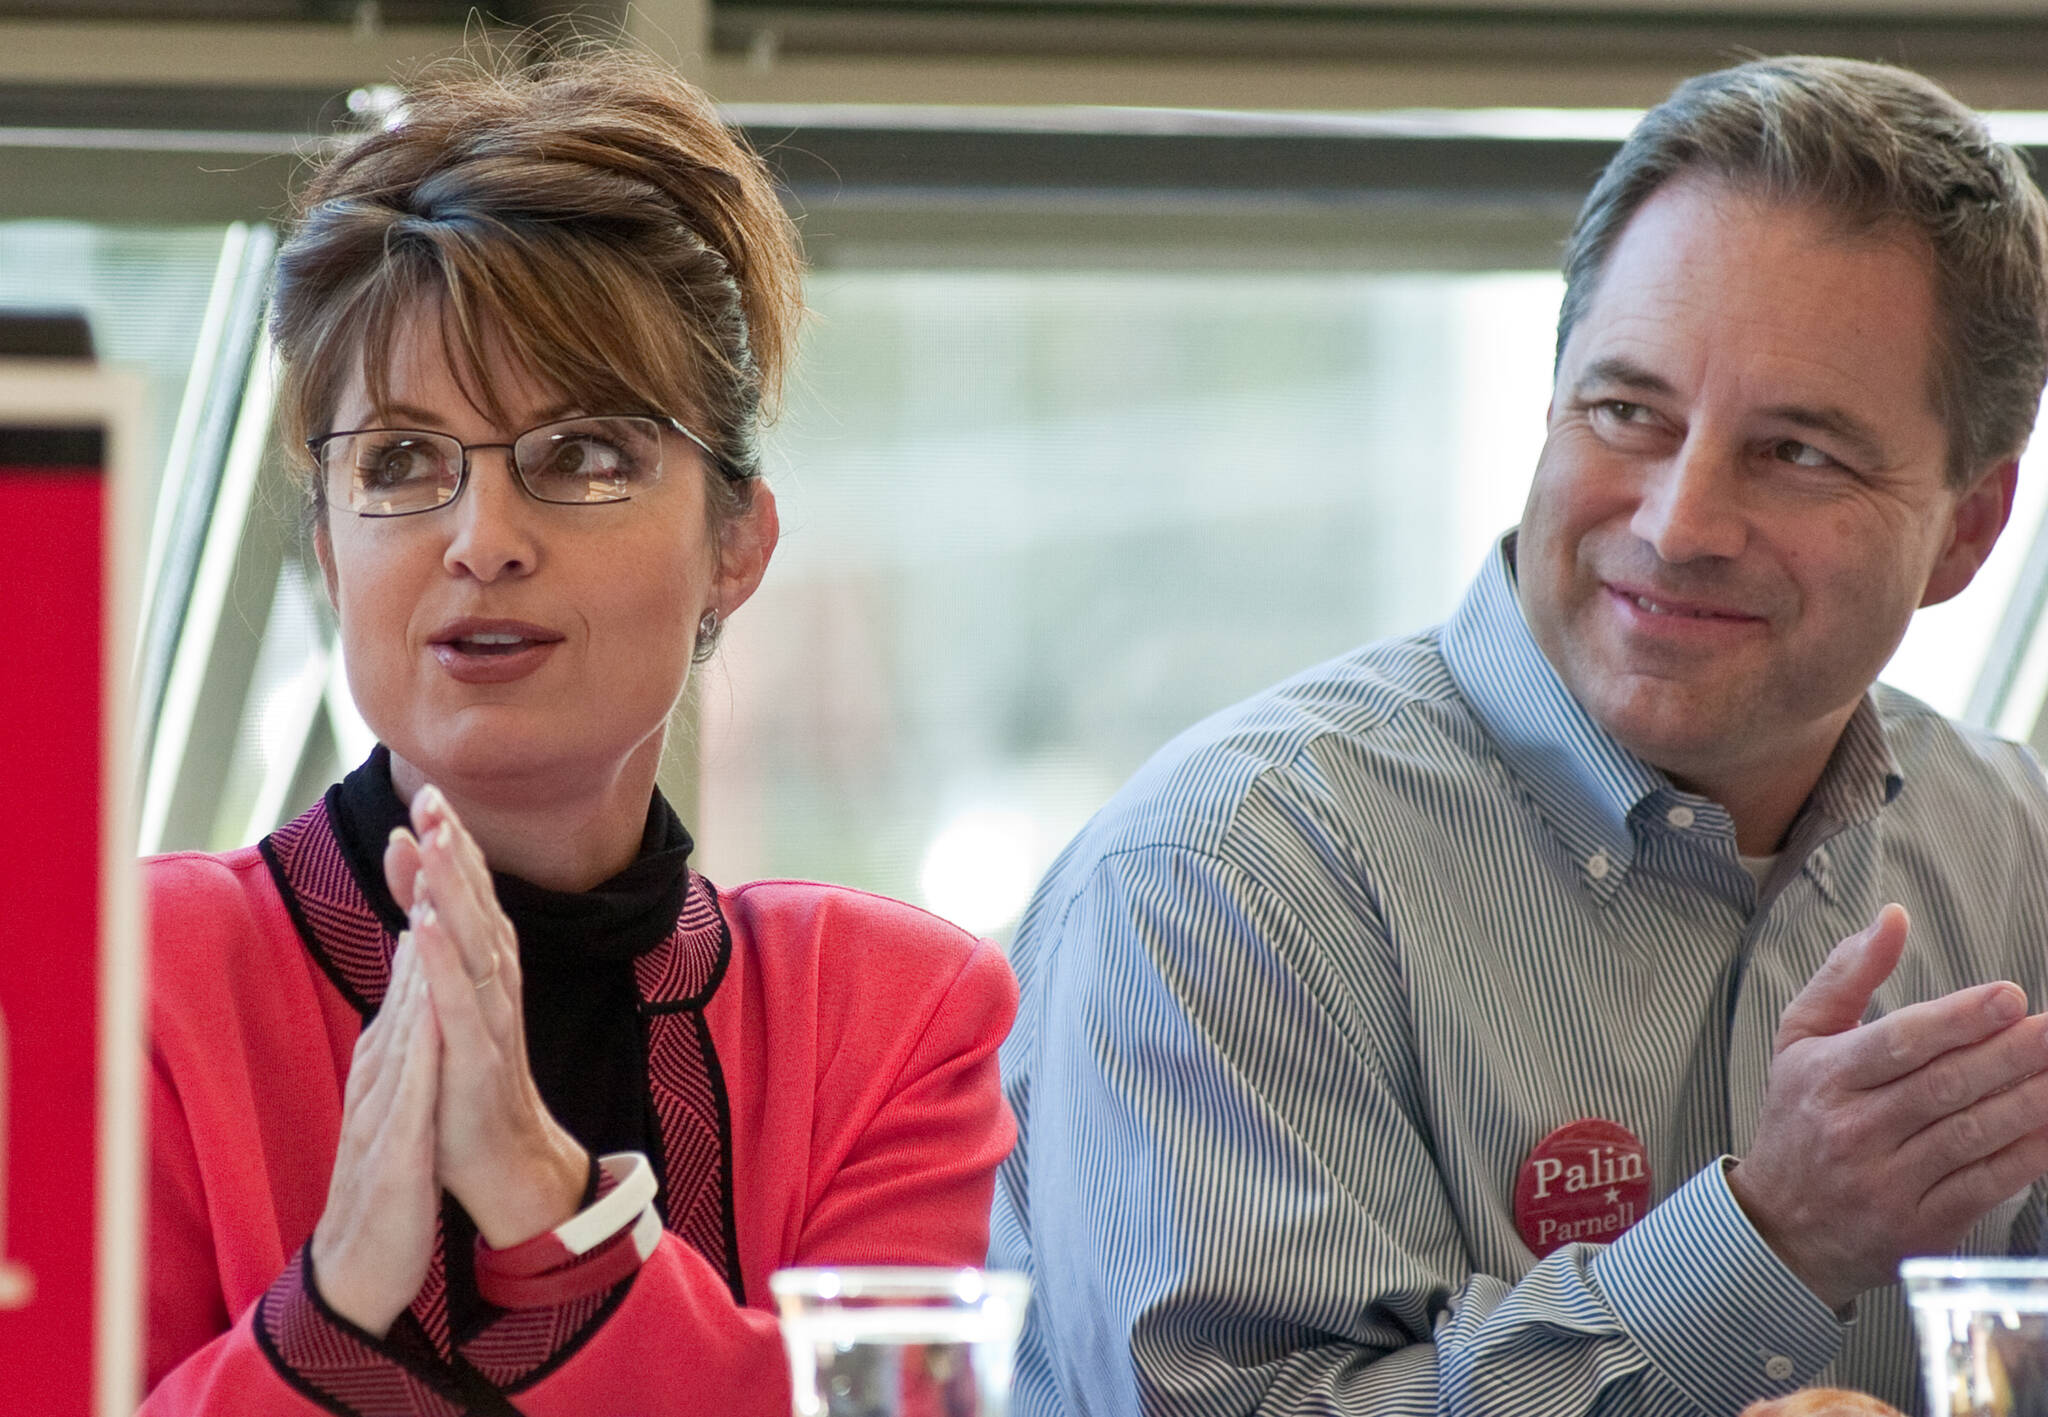 Then-canidate for governor Sarah Palin and running mate Sean Parnell listen to introductions during a Capital City Republican Women’s luncheon at the UAS Recreation Center in September 2006. (Michael Penn / Juneau Empire file)